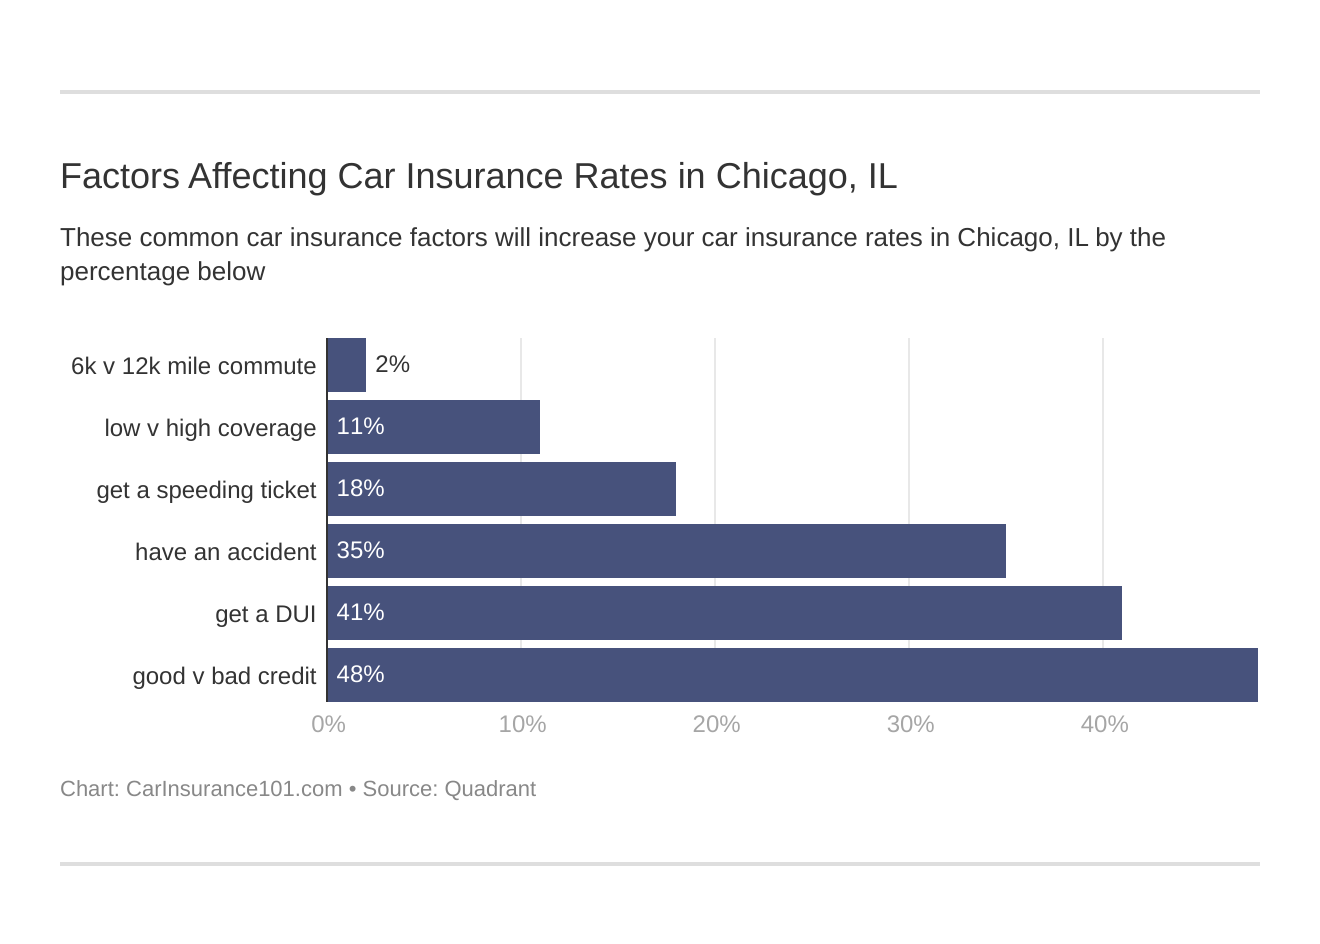 Factors Affecting Car Insurance Rates in Chicago, IL